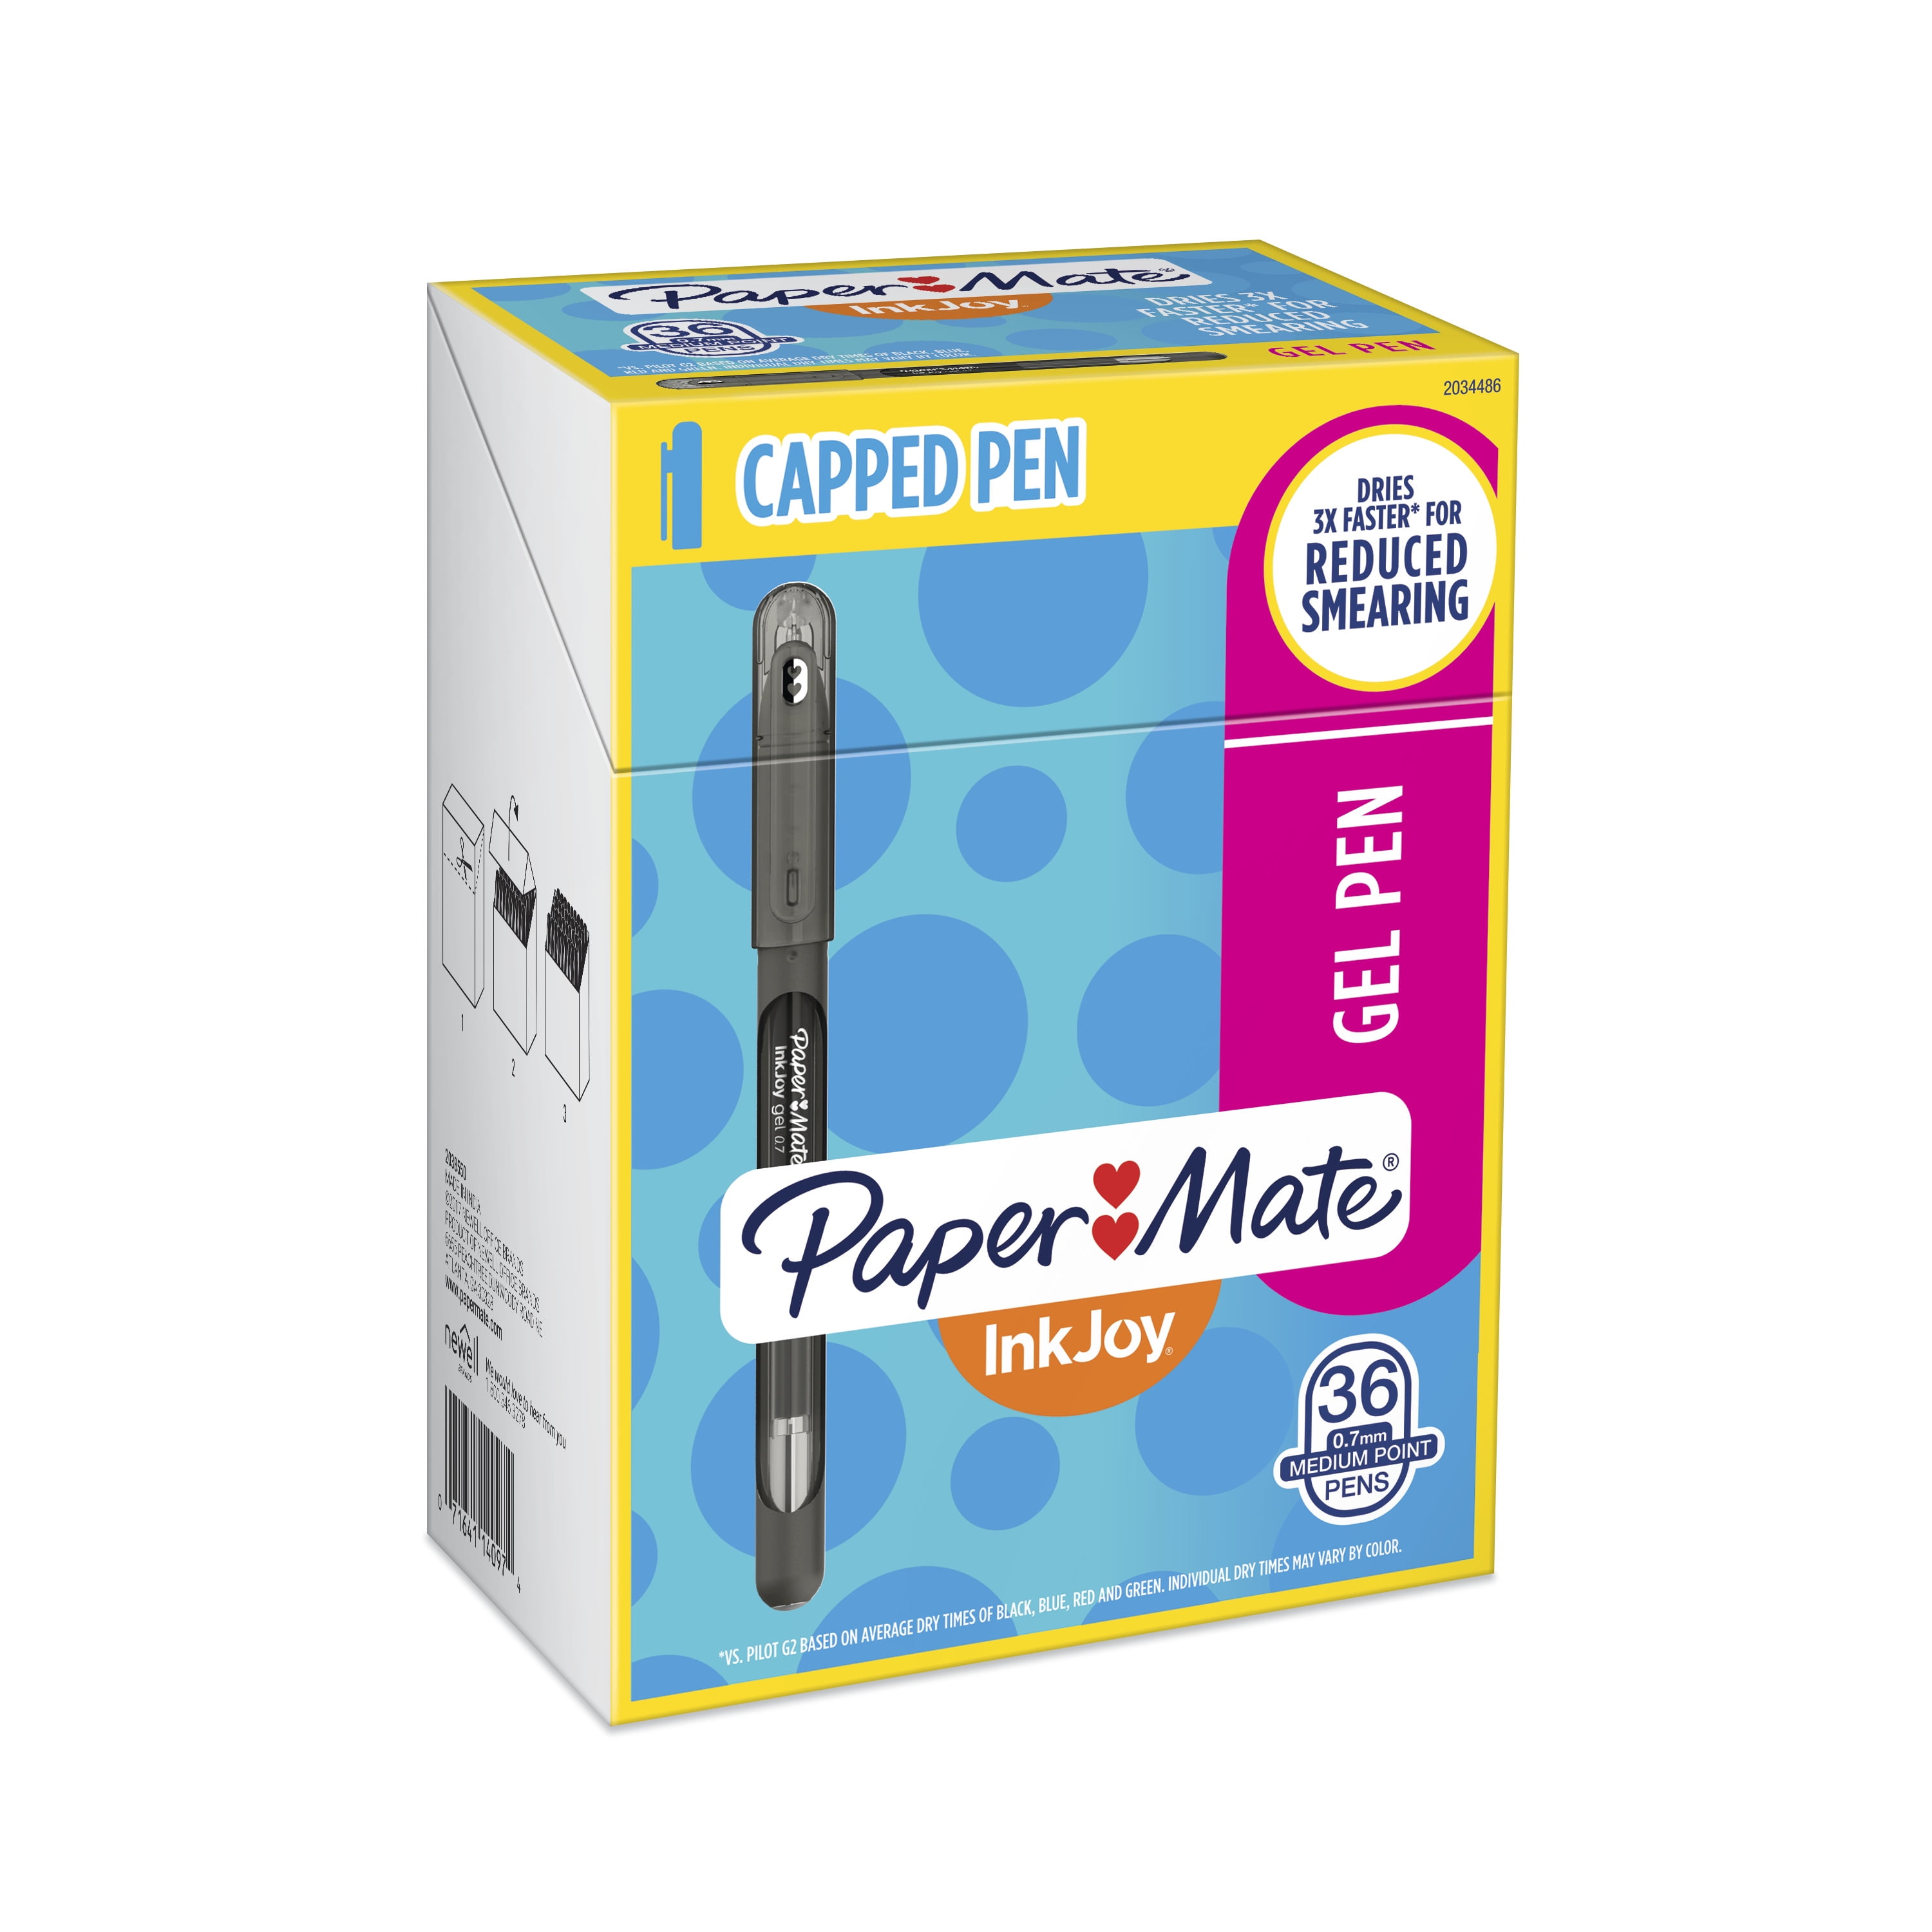 Papermate Inkjoy Gel Review and battle of the gel pens - which is best? »  Polkadotparadiso